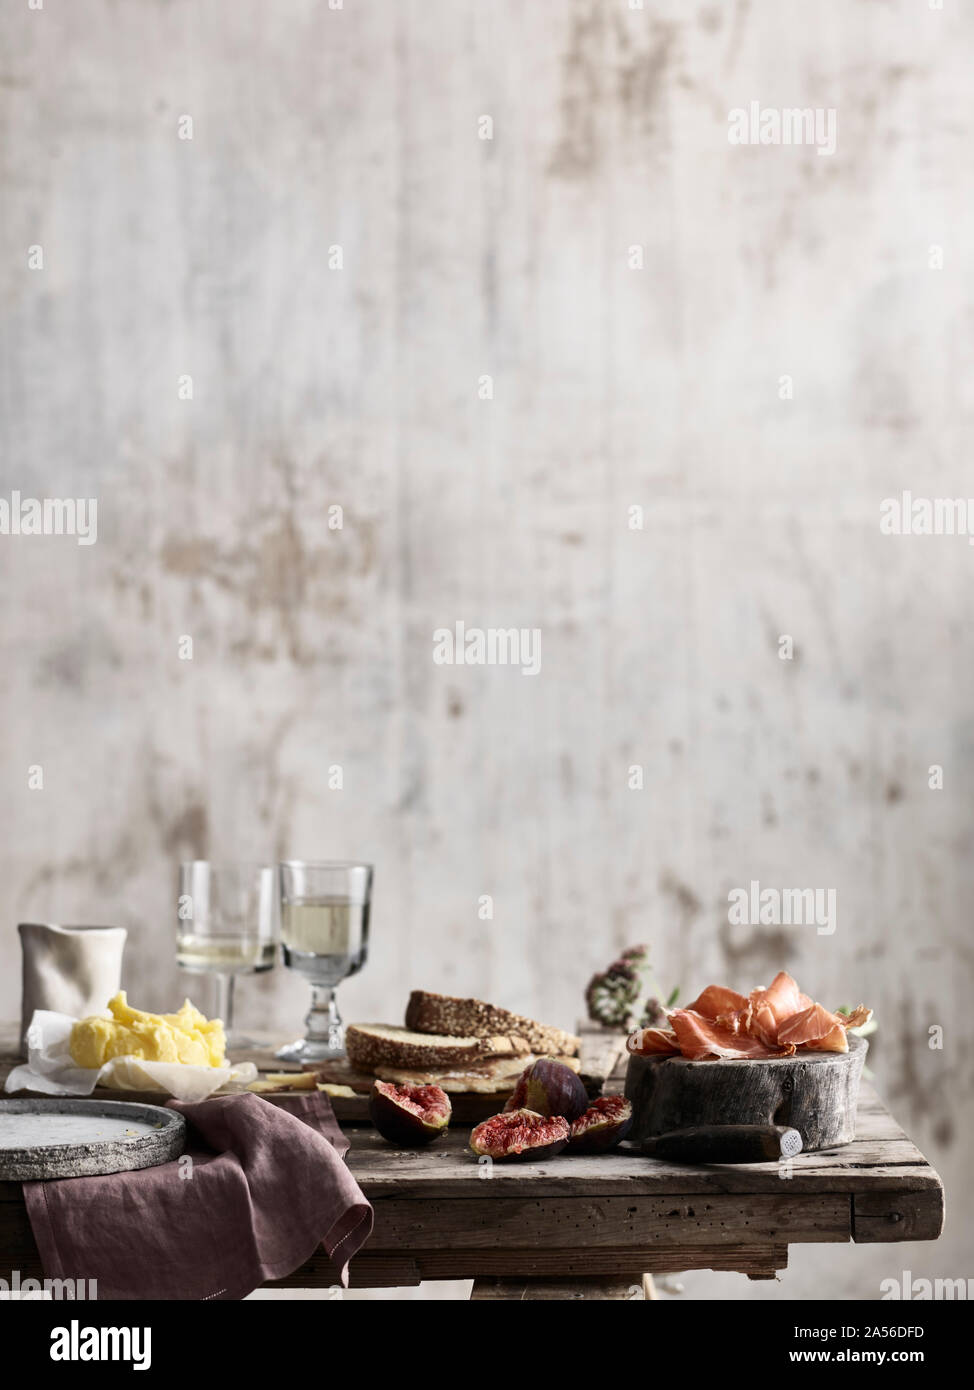 Spread of bread, butter, figs and ham on table Stock Photo